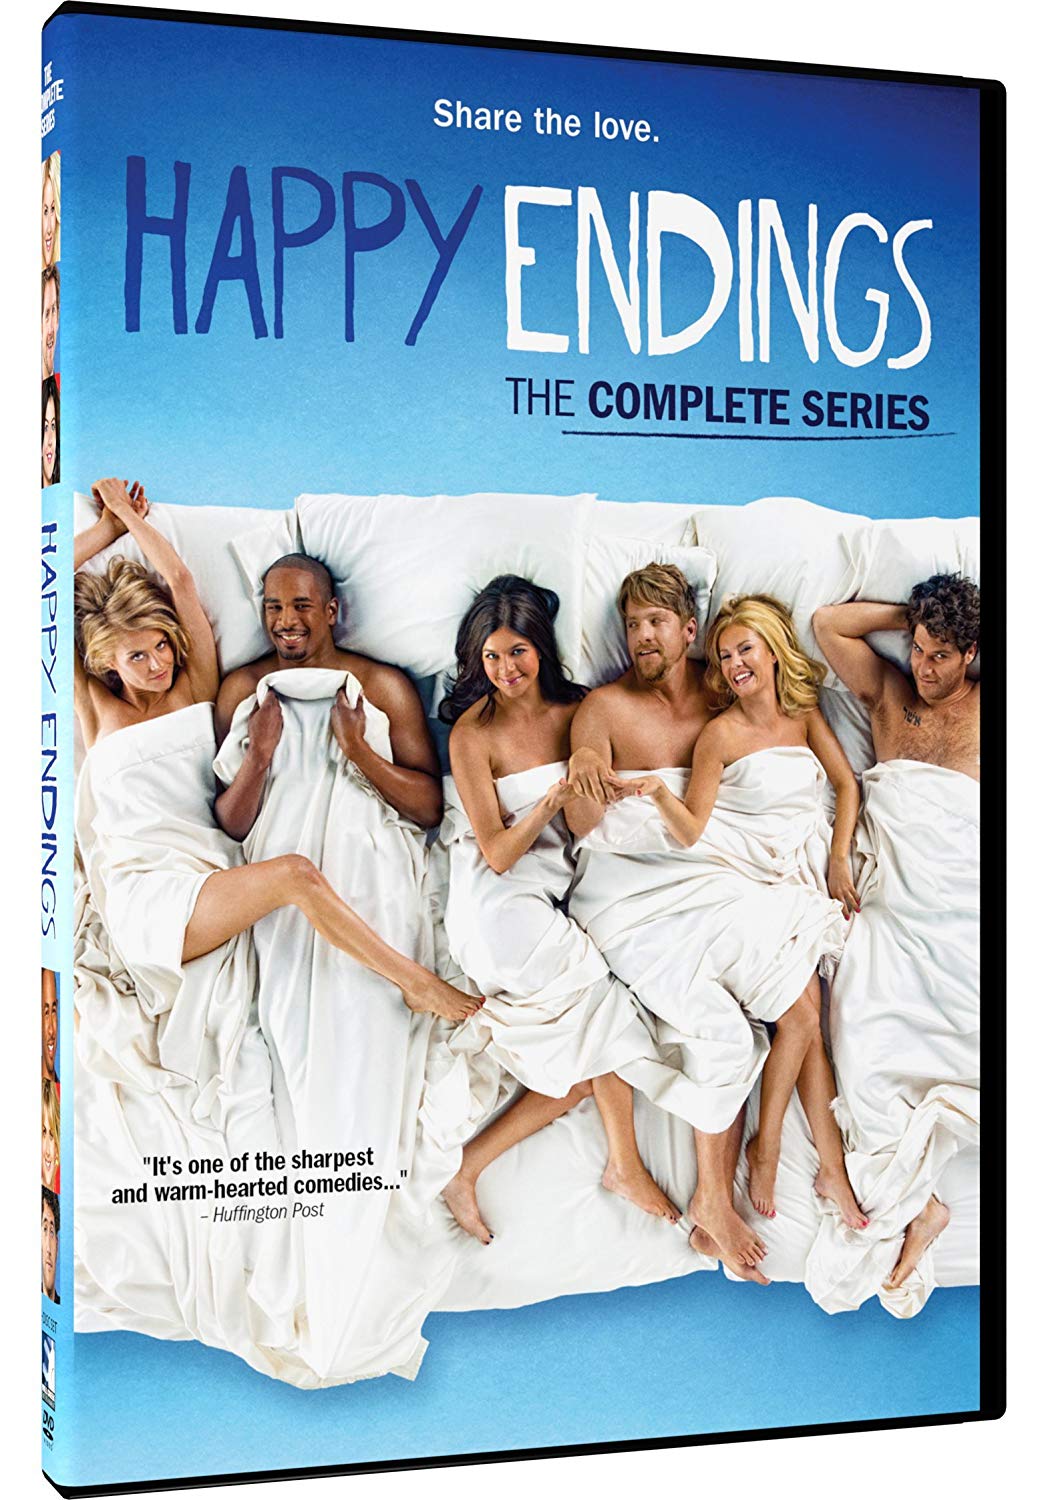 Happy Endings: The Complete Series (DVD Set) - DVD [ 2018 ]  - Comedy Television On DVD - TV Shows On GRUV